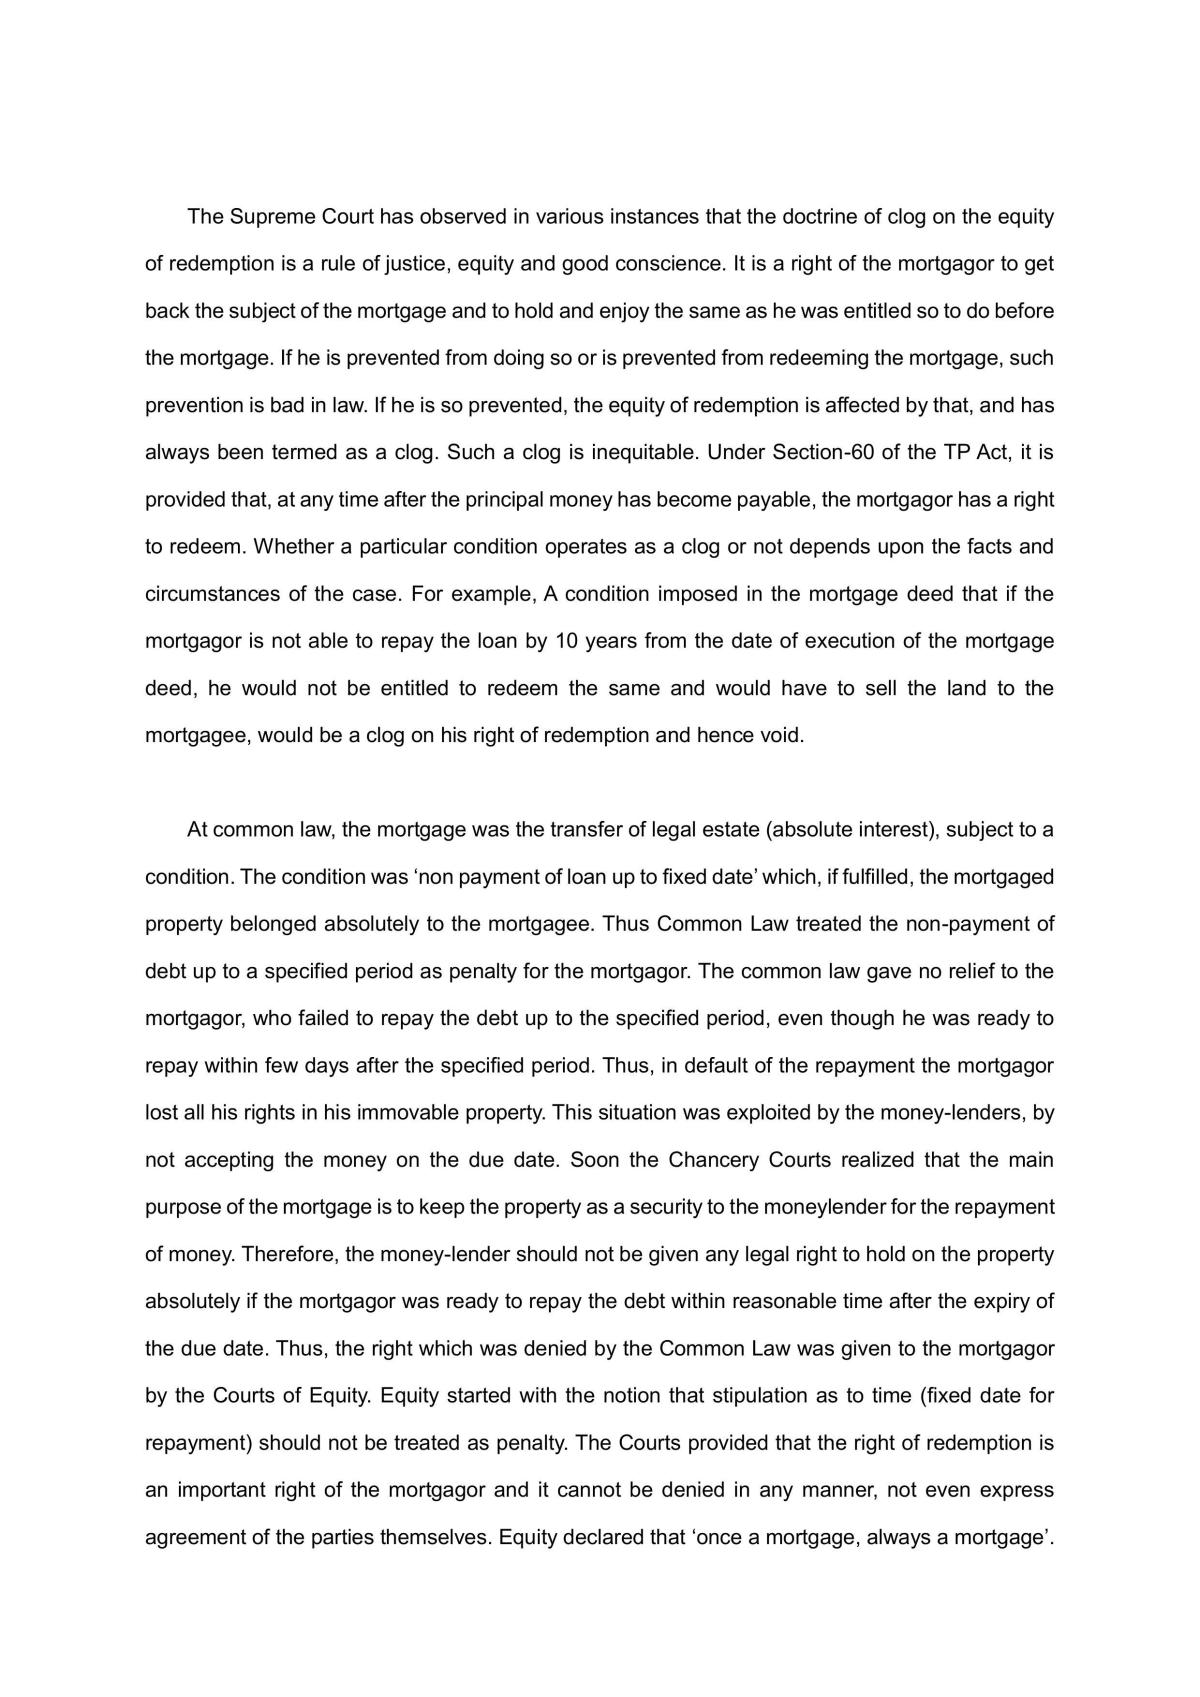 Essay Discussing Maxim ‘Once a Mortgage, Always a Mortgage’. - Page 2